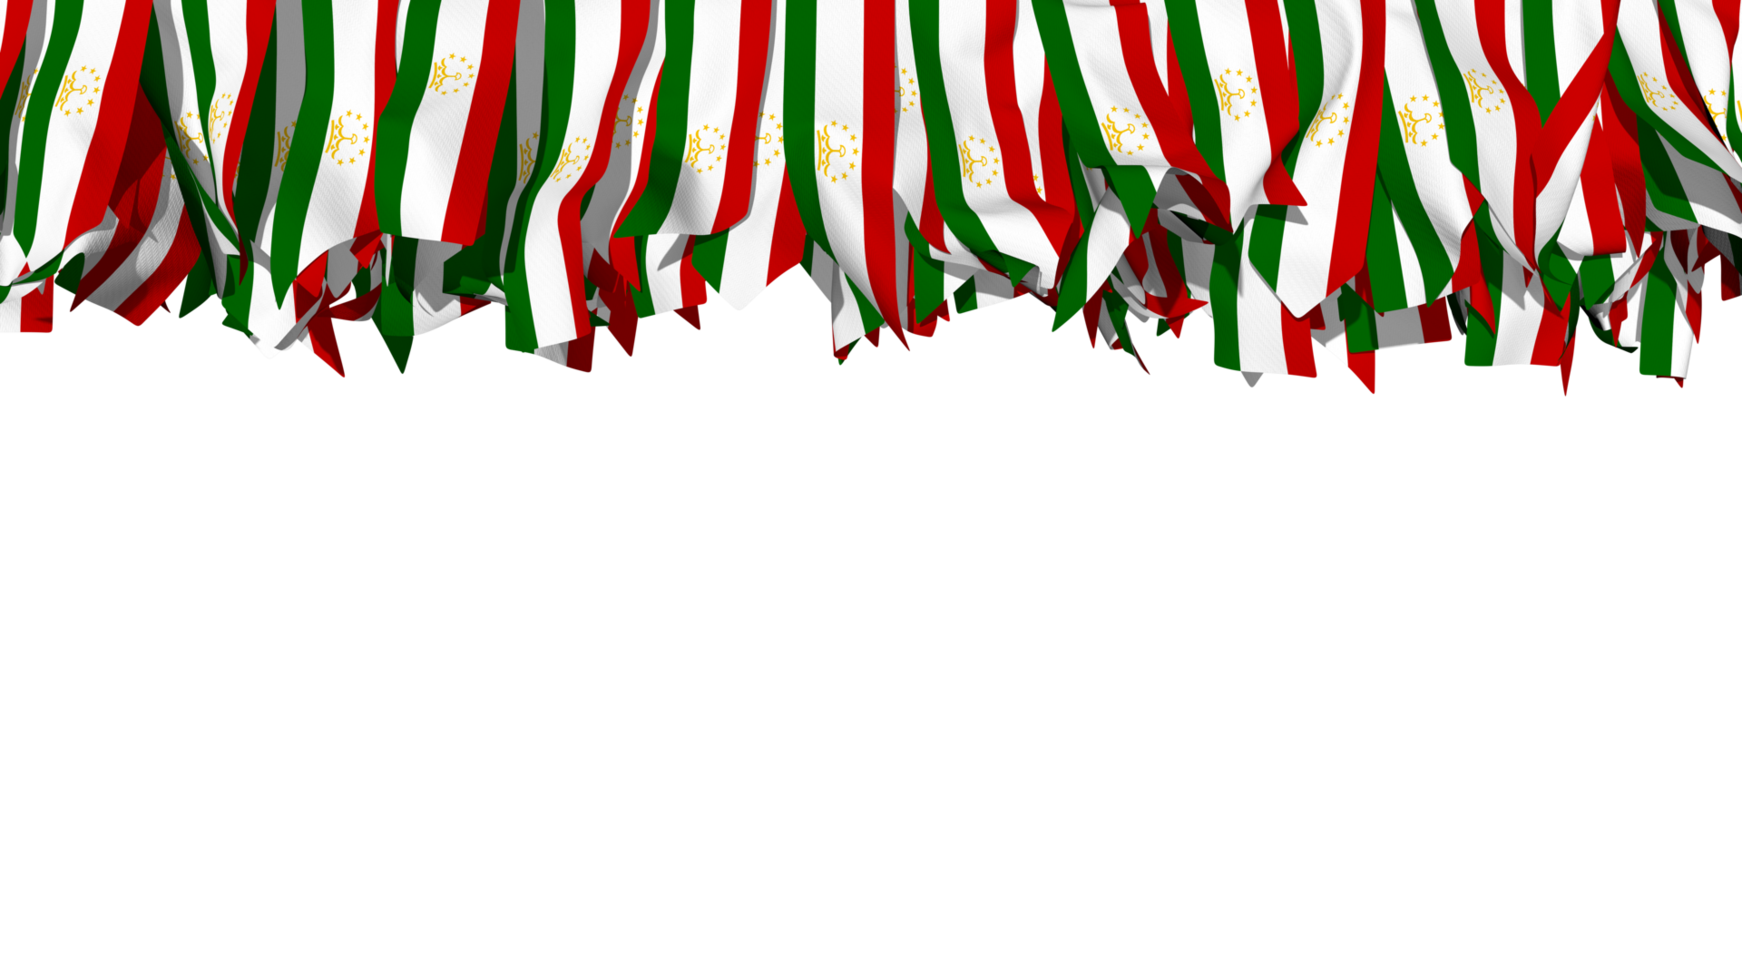 Tajikistan Flag Different Shapes of Cloth Stripe Hanging From Top, Independence Day, 3D Rendering png